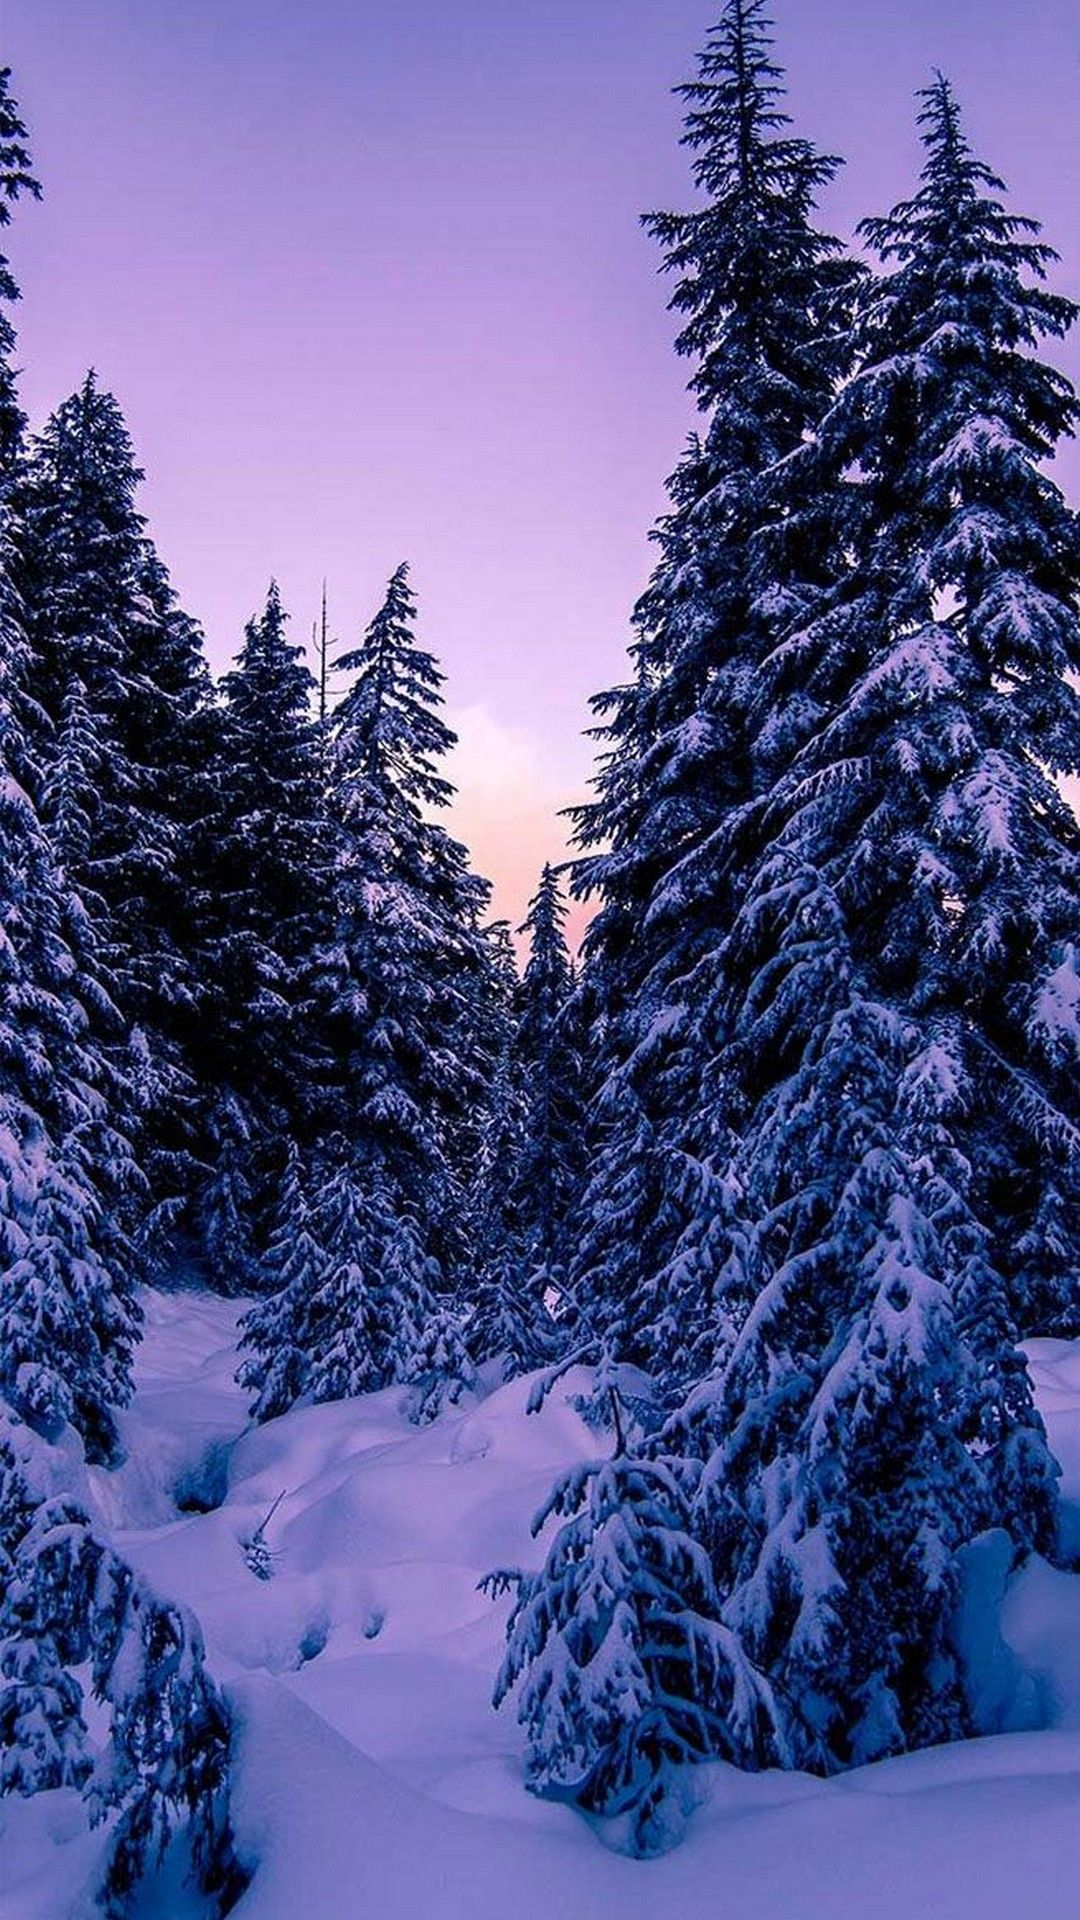 A snow covered forest with trees and pine - Winter, snow